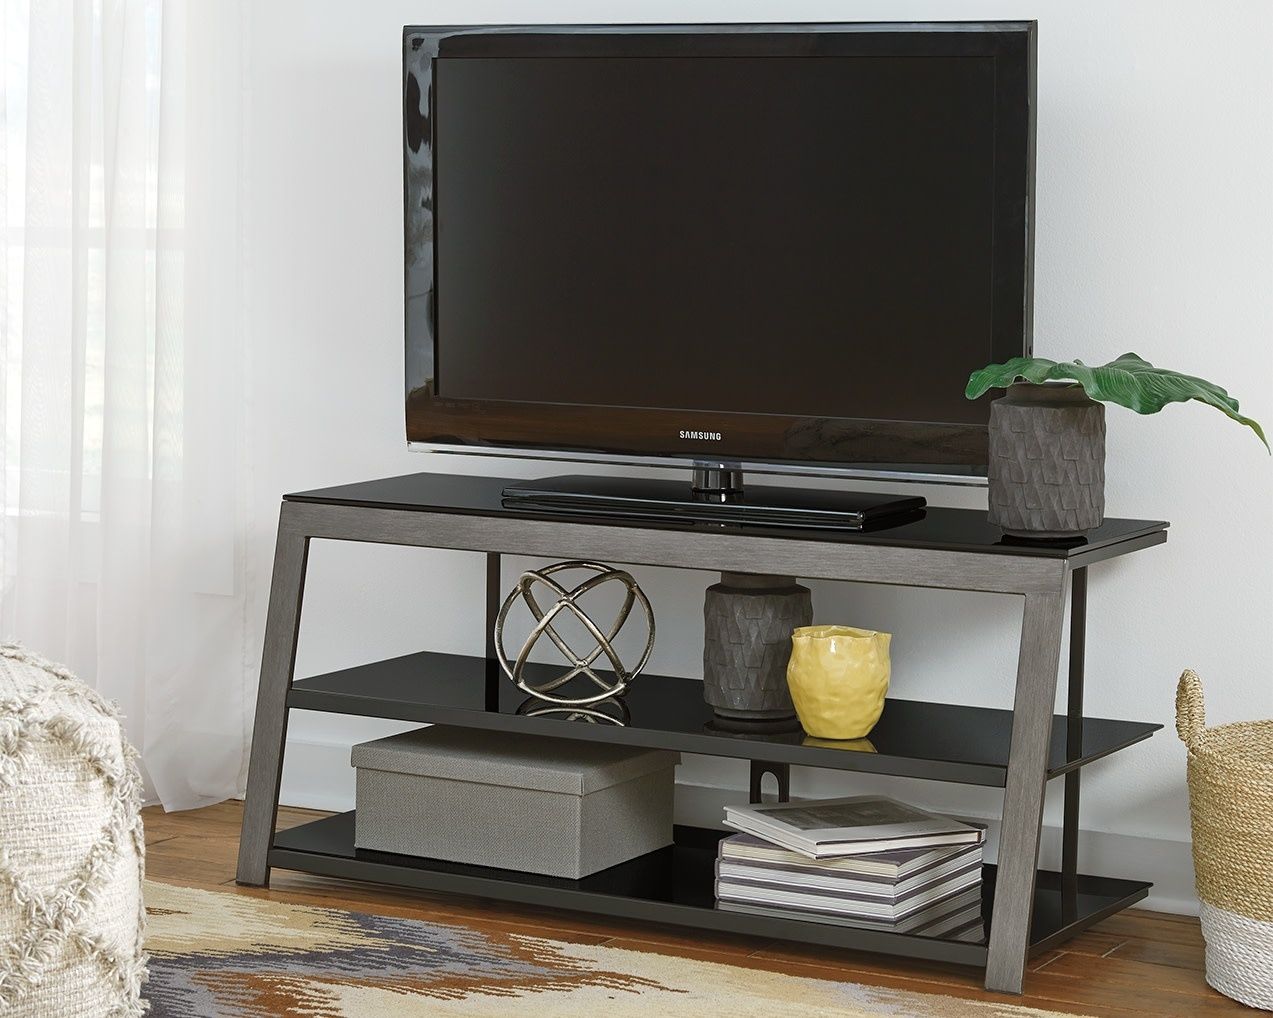 Rollynx  Black Contemporary Tv Stand  48" W326 10 – Hvl With Regard To Contemporary Black Tv Stands (View 1 of 15)